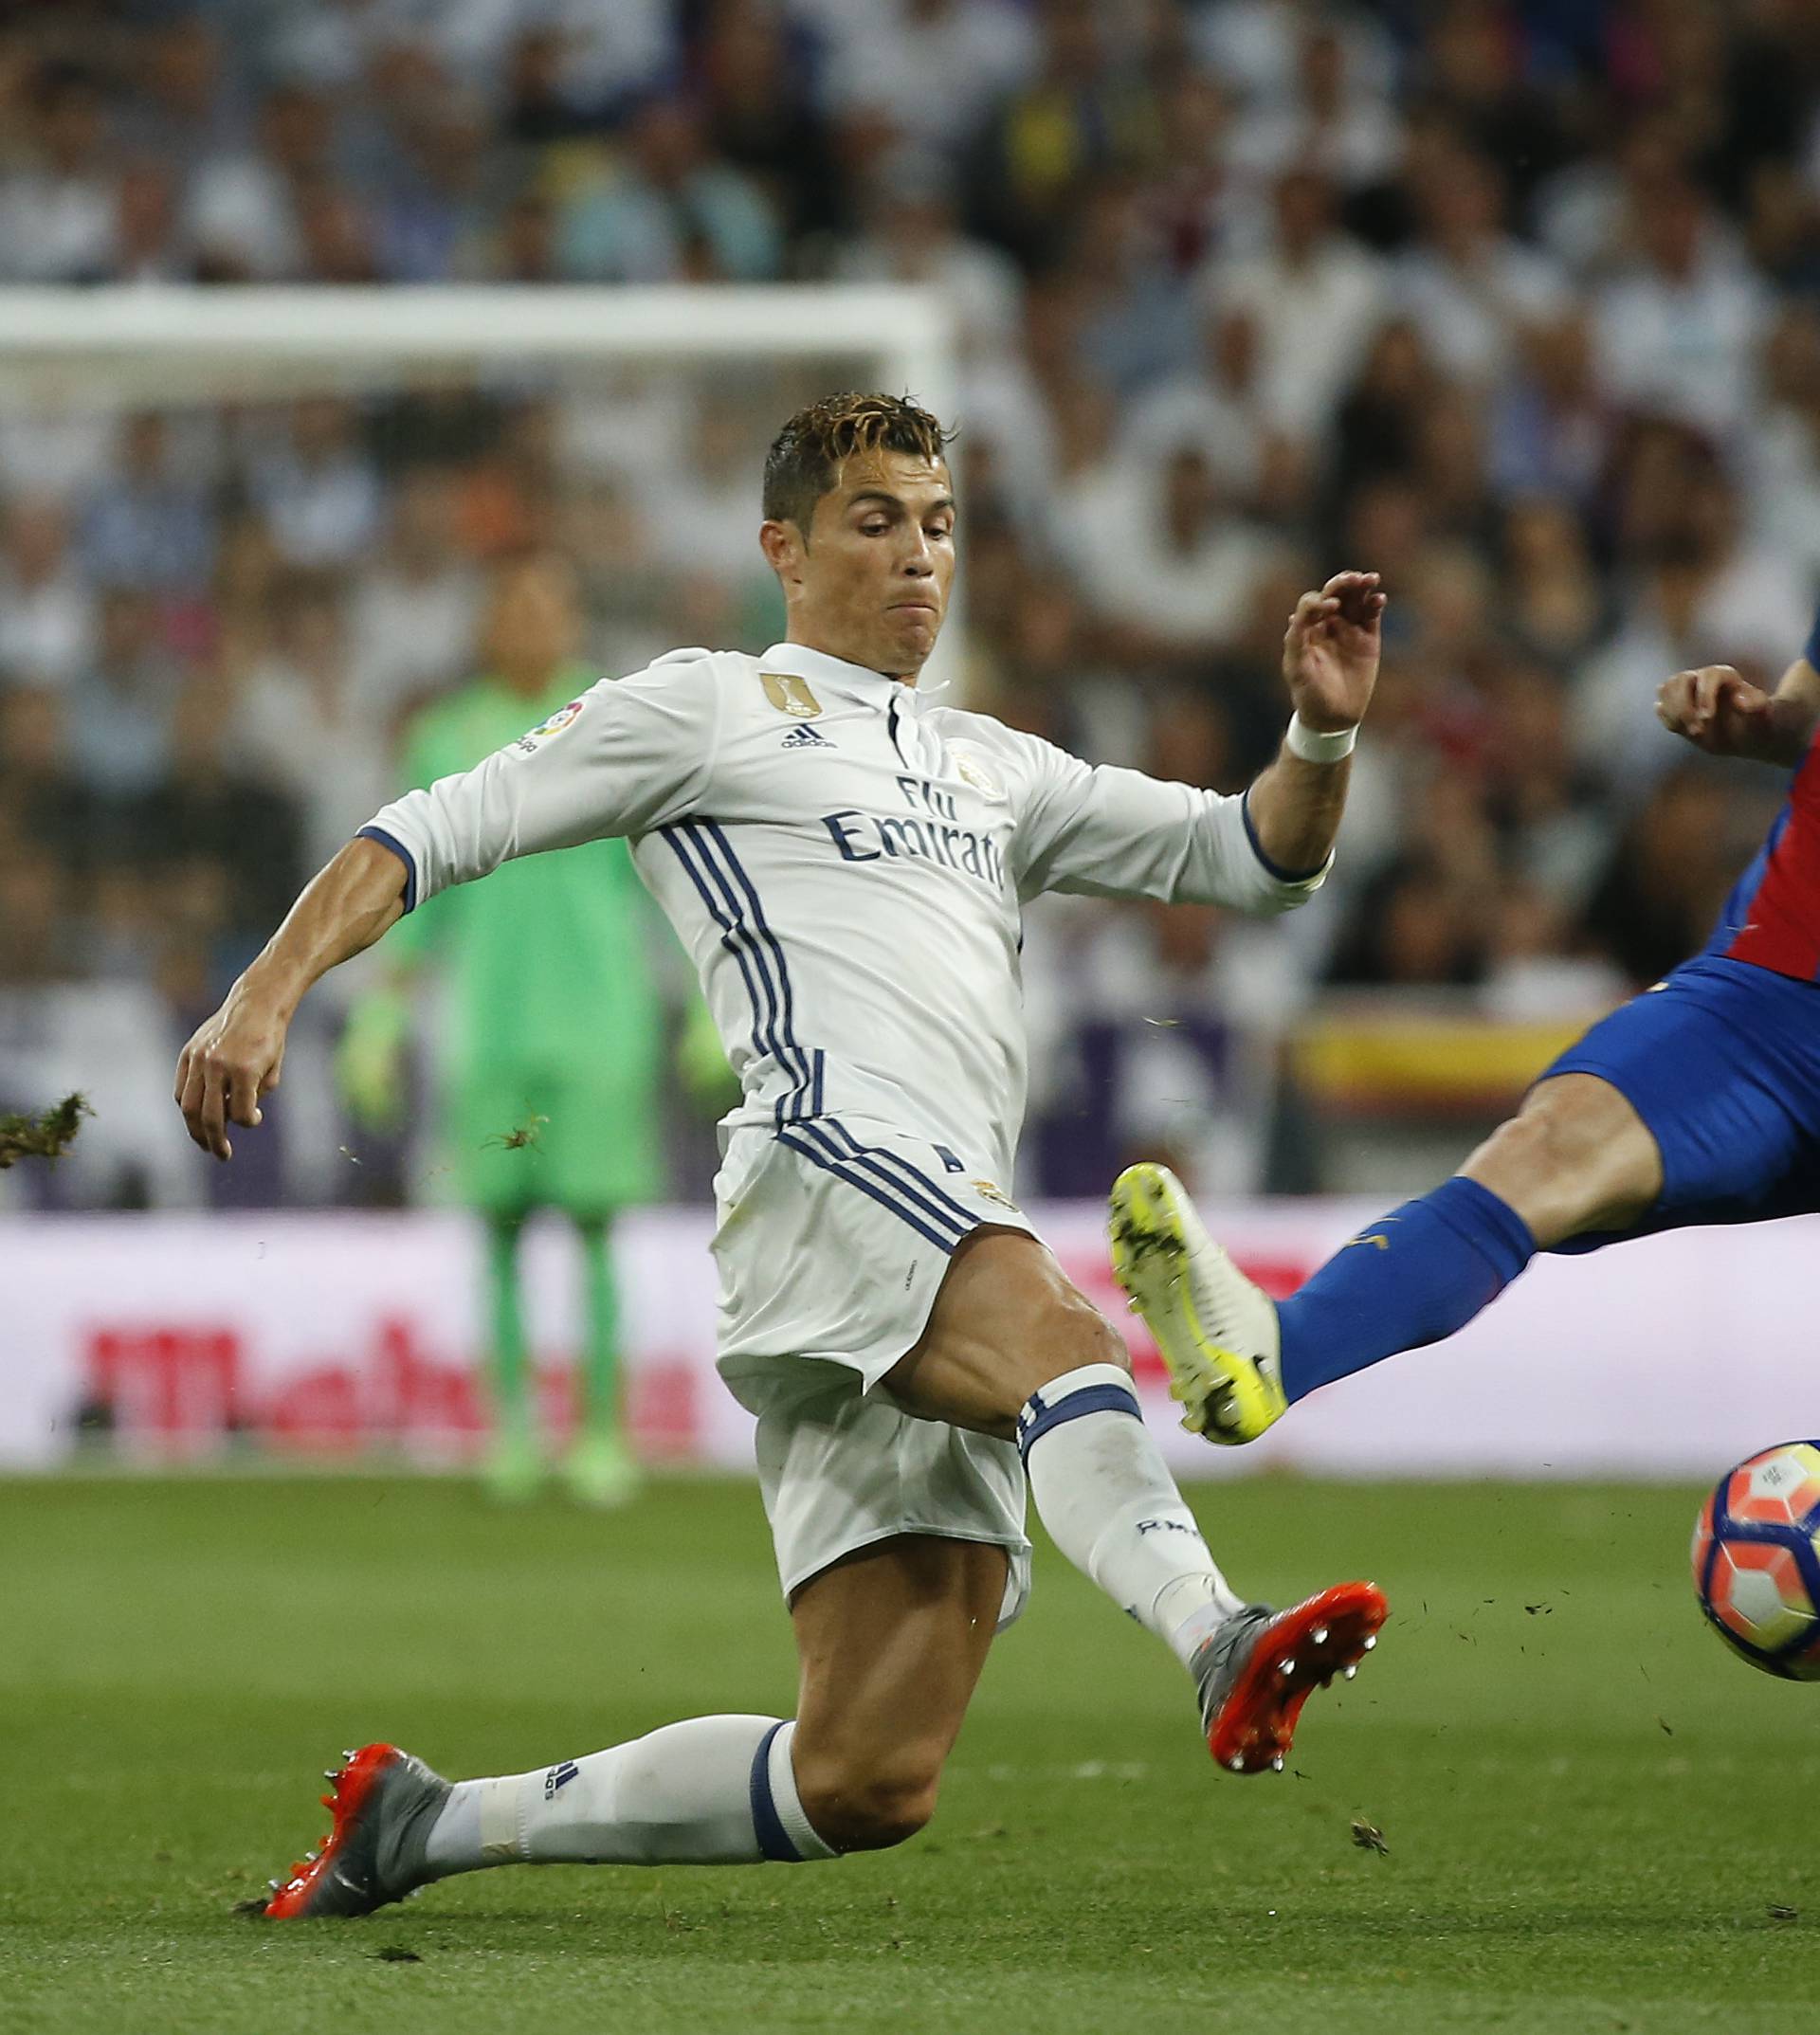 Barcelona's Andres Iniesta in action with Real Madrid's Cristiano Ronaldo